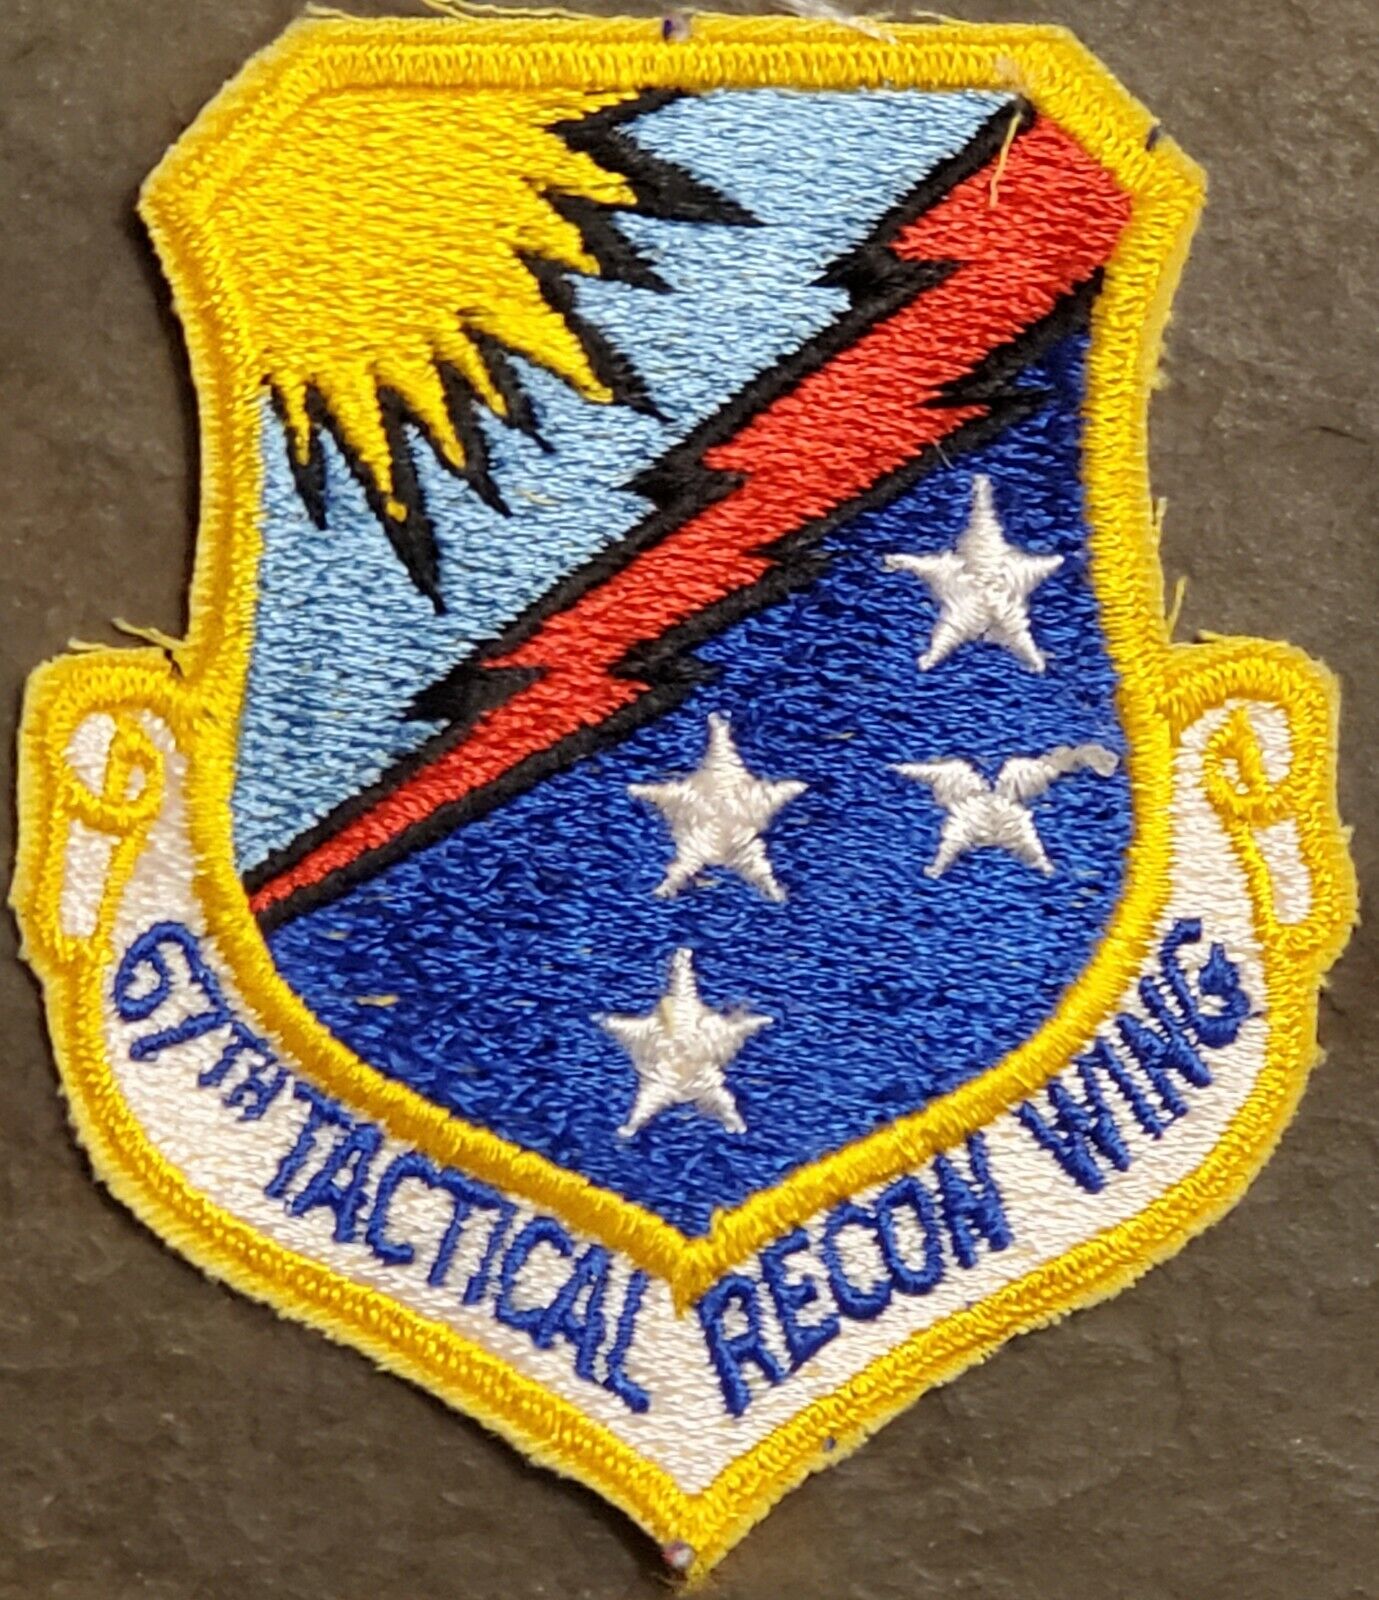 USAF 67TH TACTICAL RECON WING SQUADRON PATCH COLOR DRESS ORIGINAL VTG MILITARY